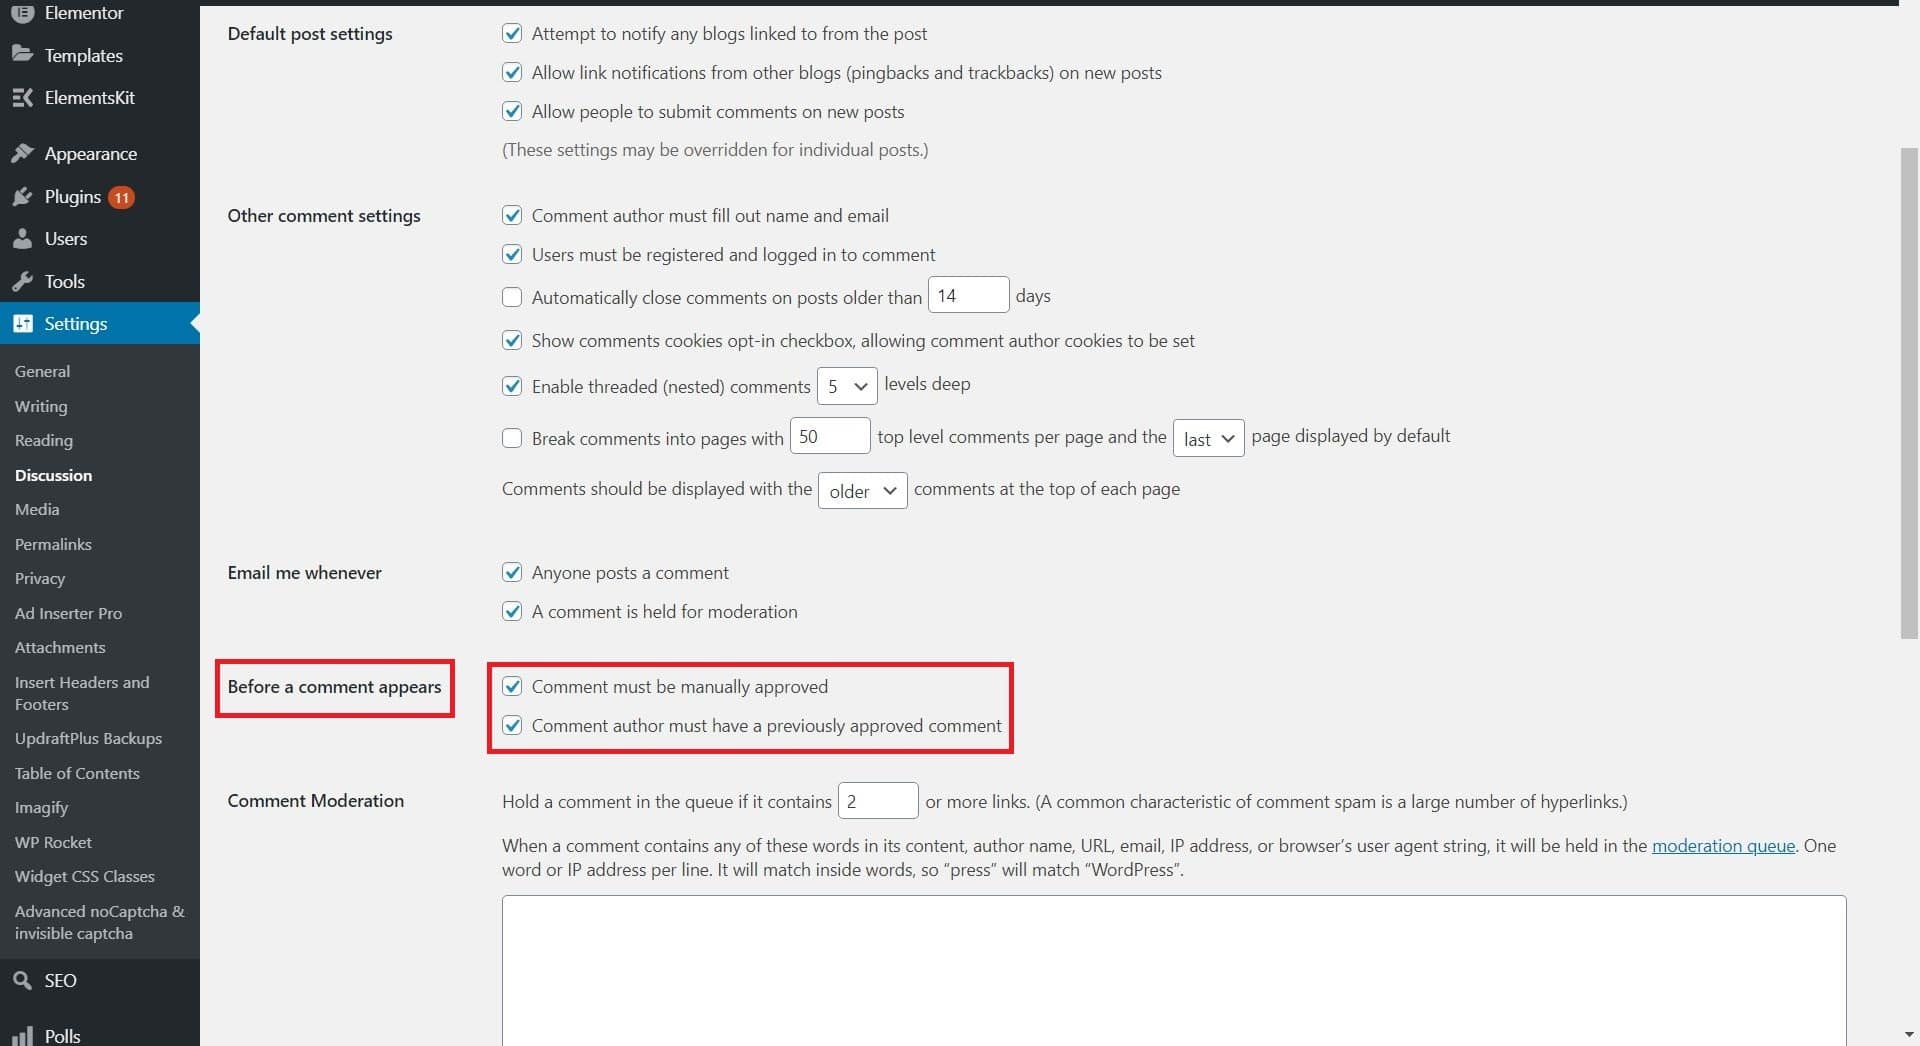 Check the “before a comment appears” settings to fix WordPress comments not showing in admin or on posts